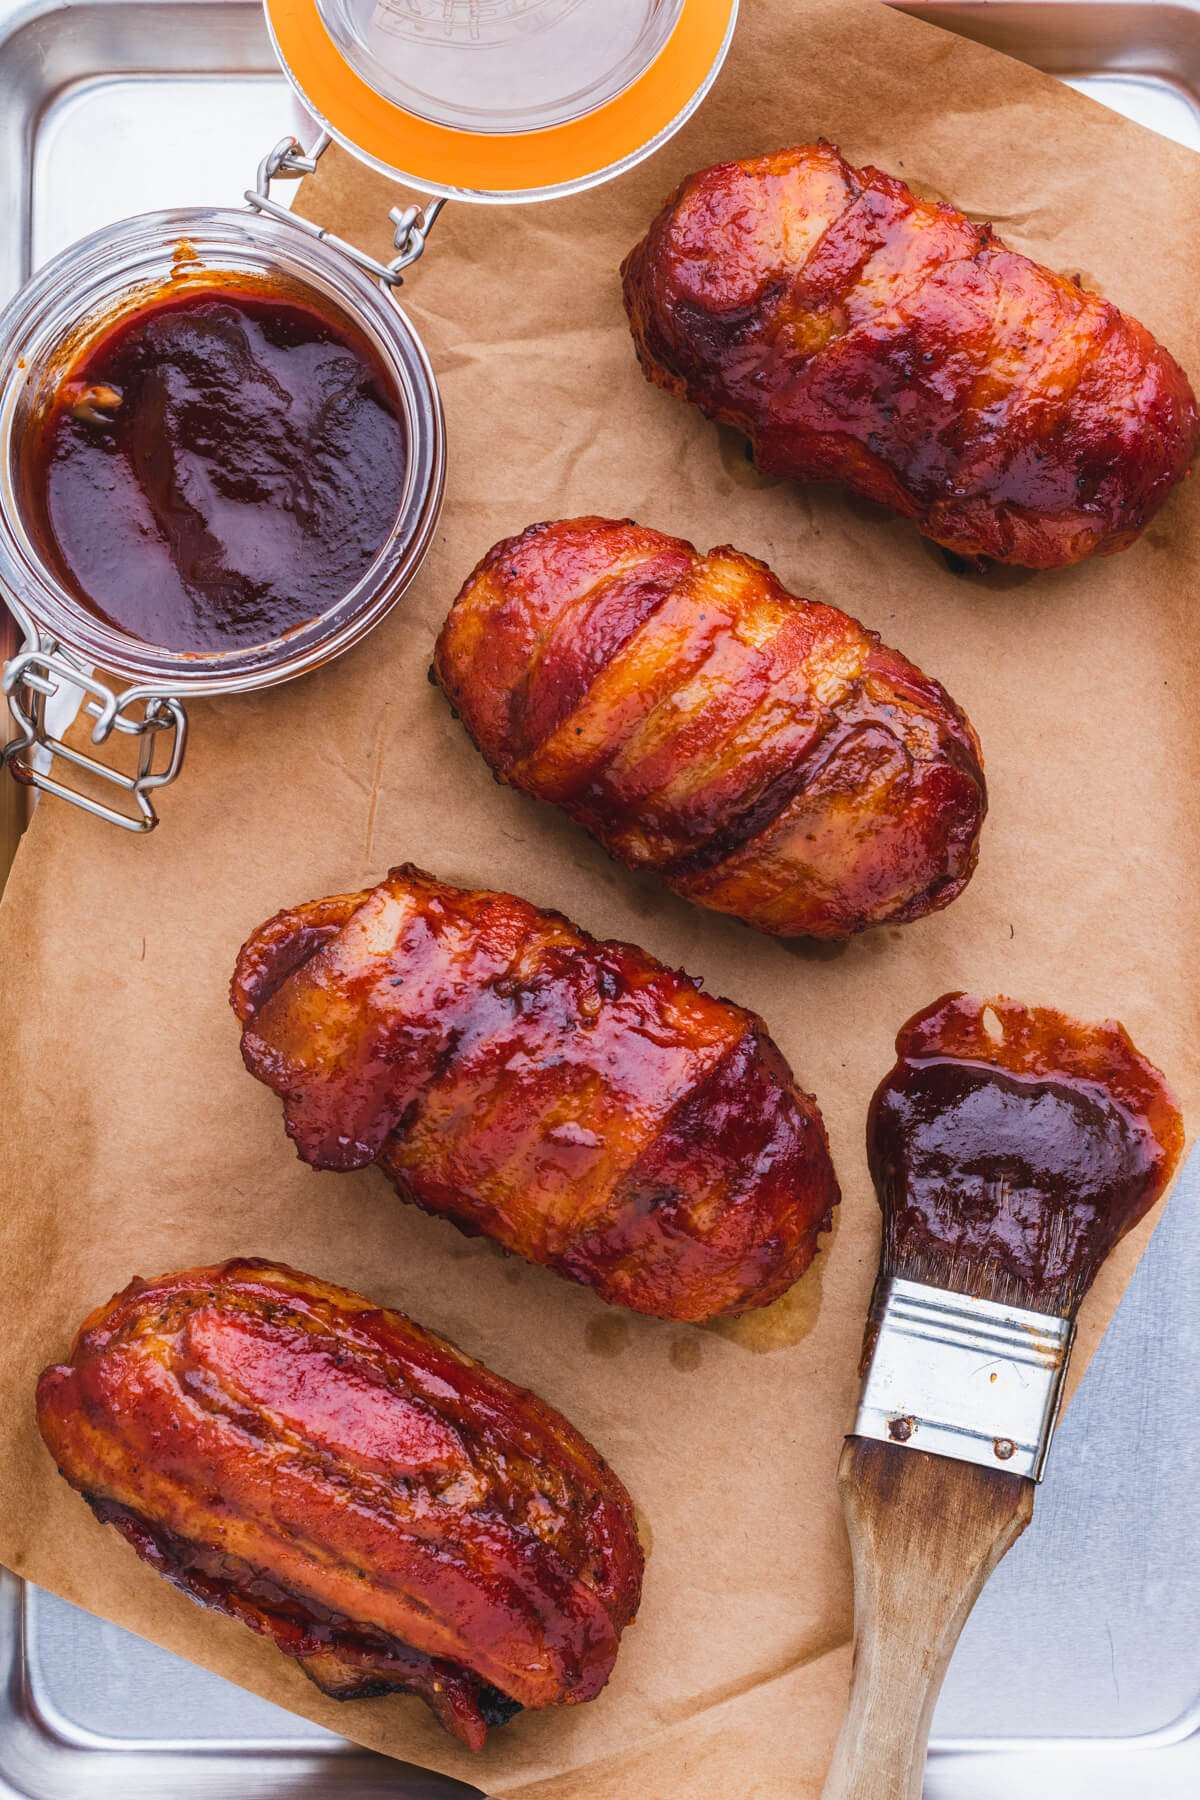 Four bacon wrapped and glazed Armadillo Egg appetizers on butcher paper beside a jar of BBQ sauce and brush full of the same BBQ sauce.